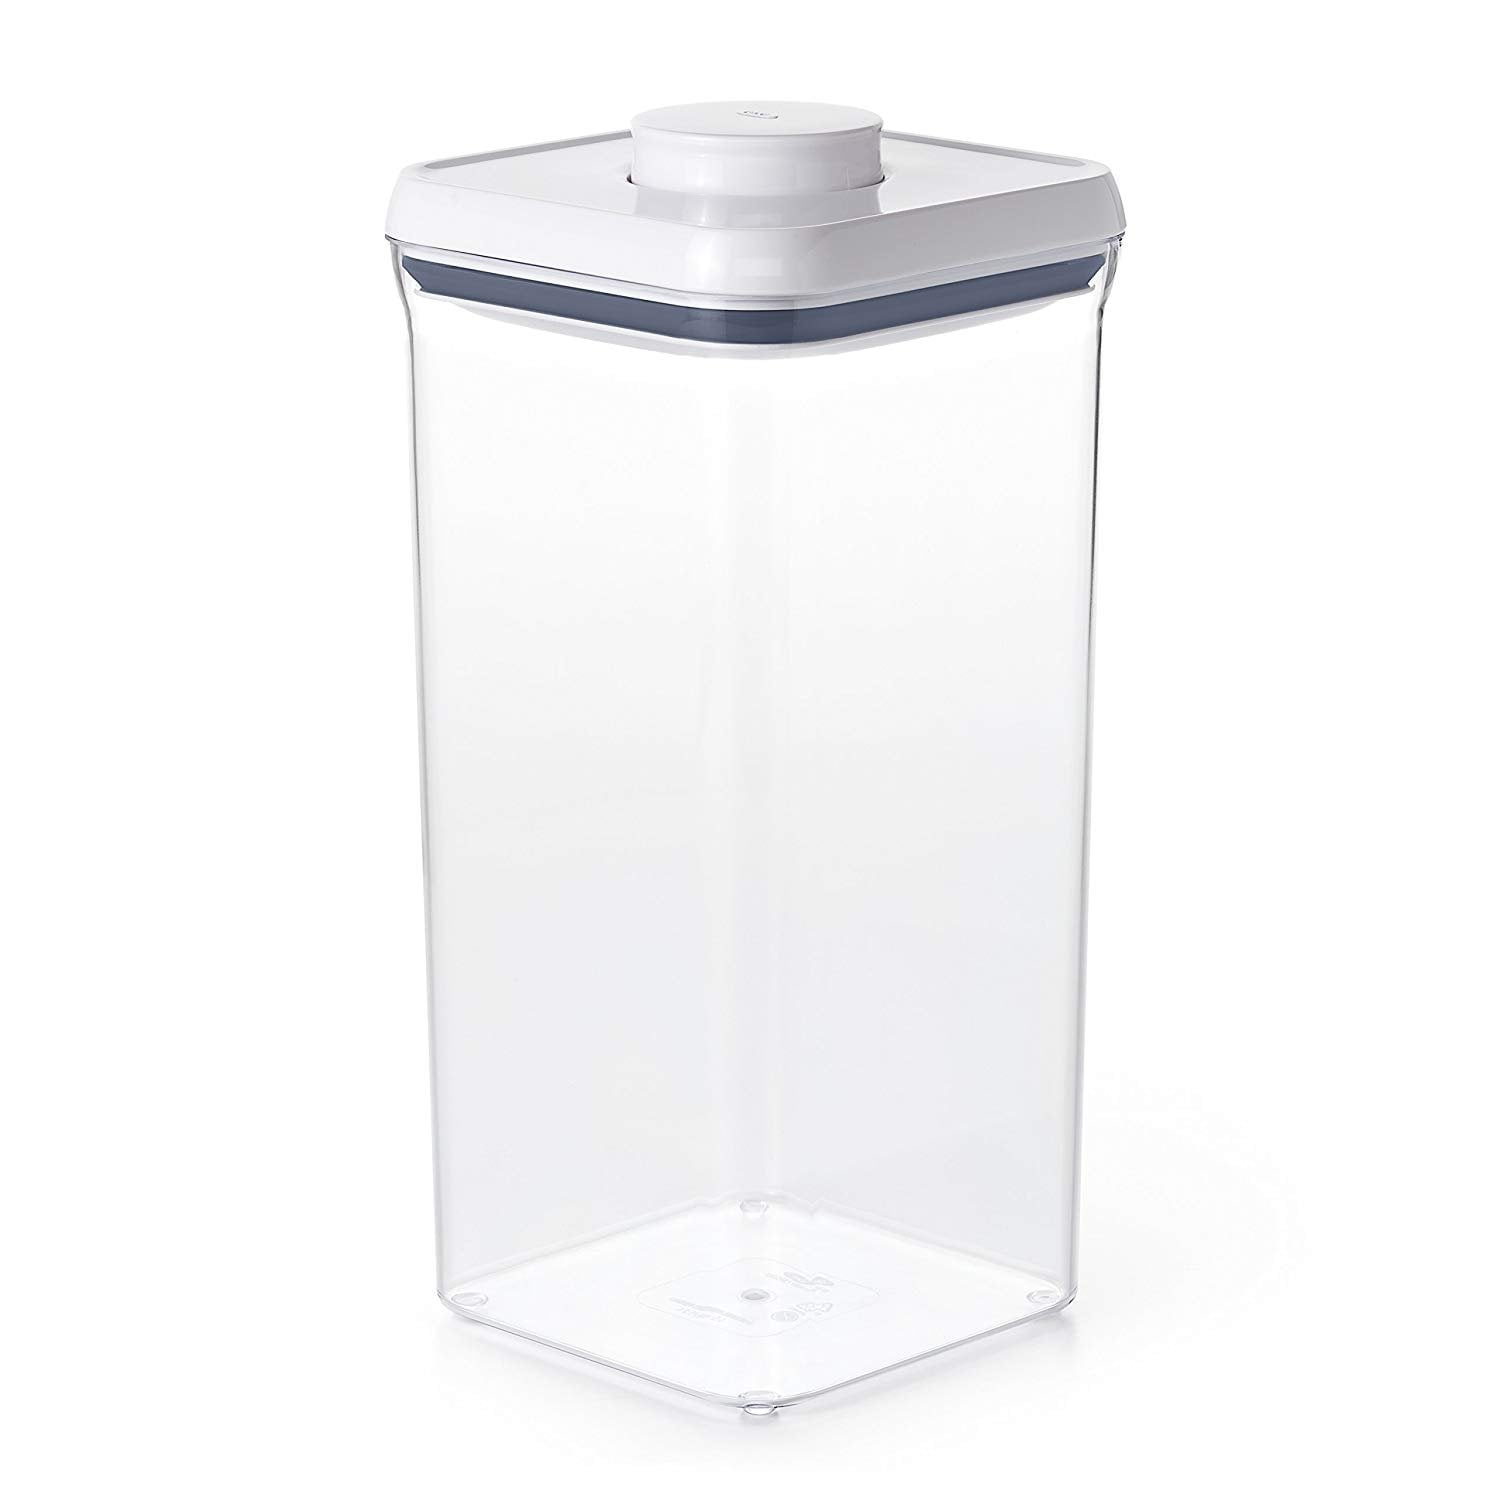  OXO Good Grips POP Container - Airtight Food Storage - Big  Square Tall 6.0 Qt Ideal for bulk snacks and cereal : Home & Kitchen